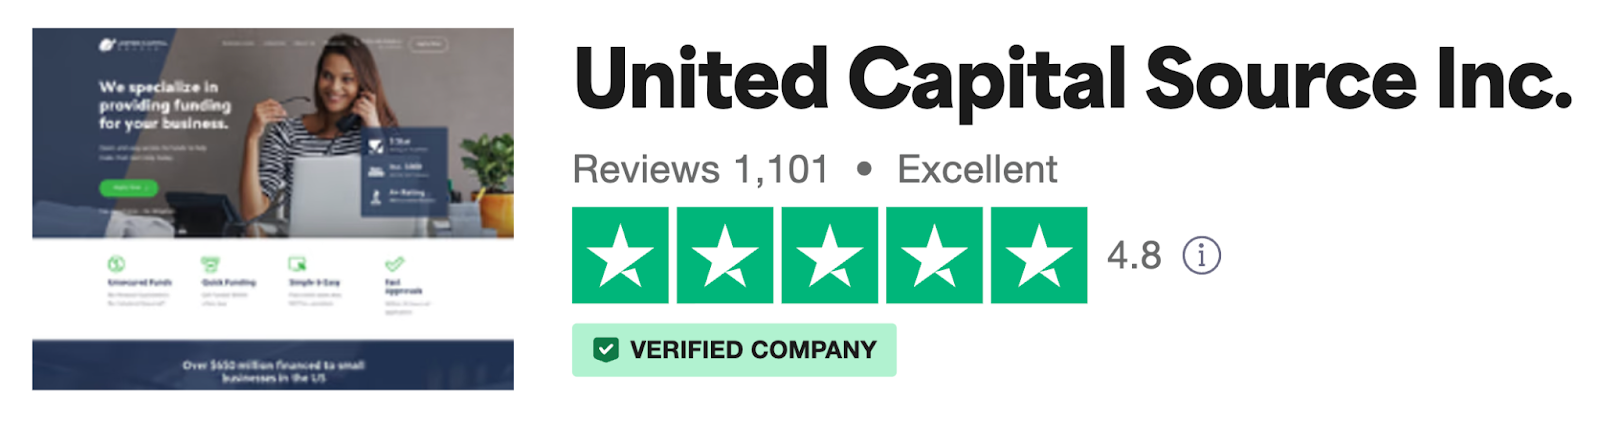 United Capital Source reviews